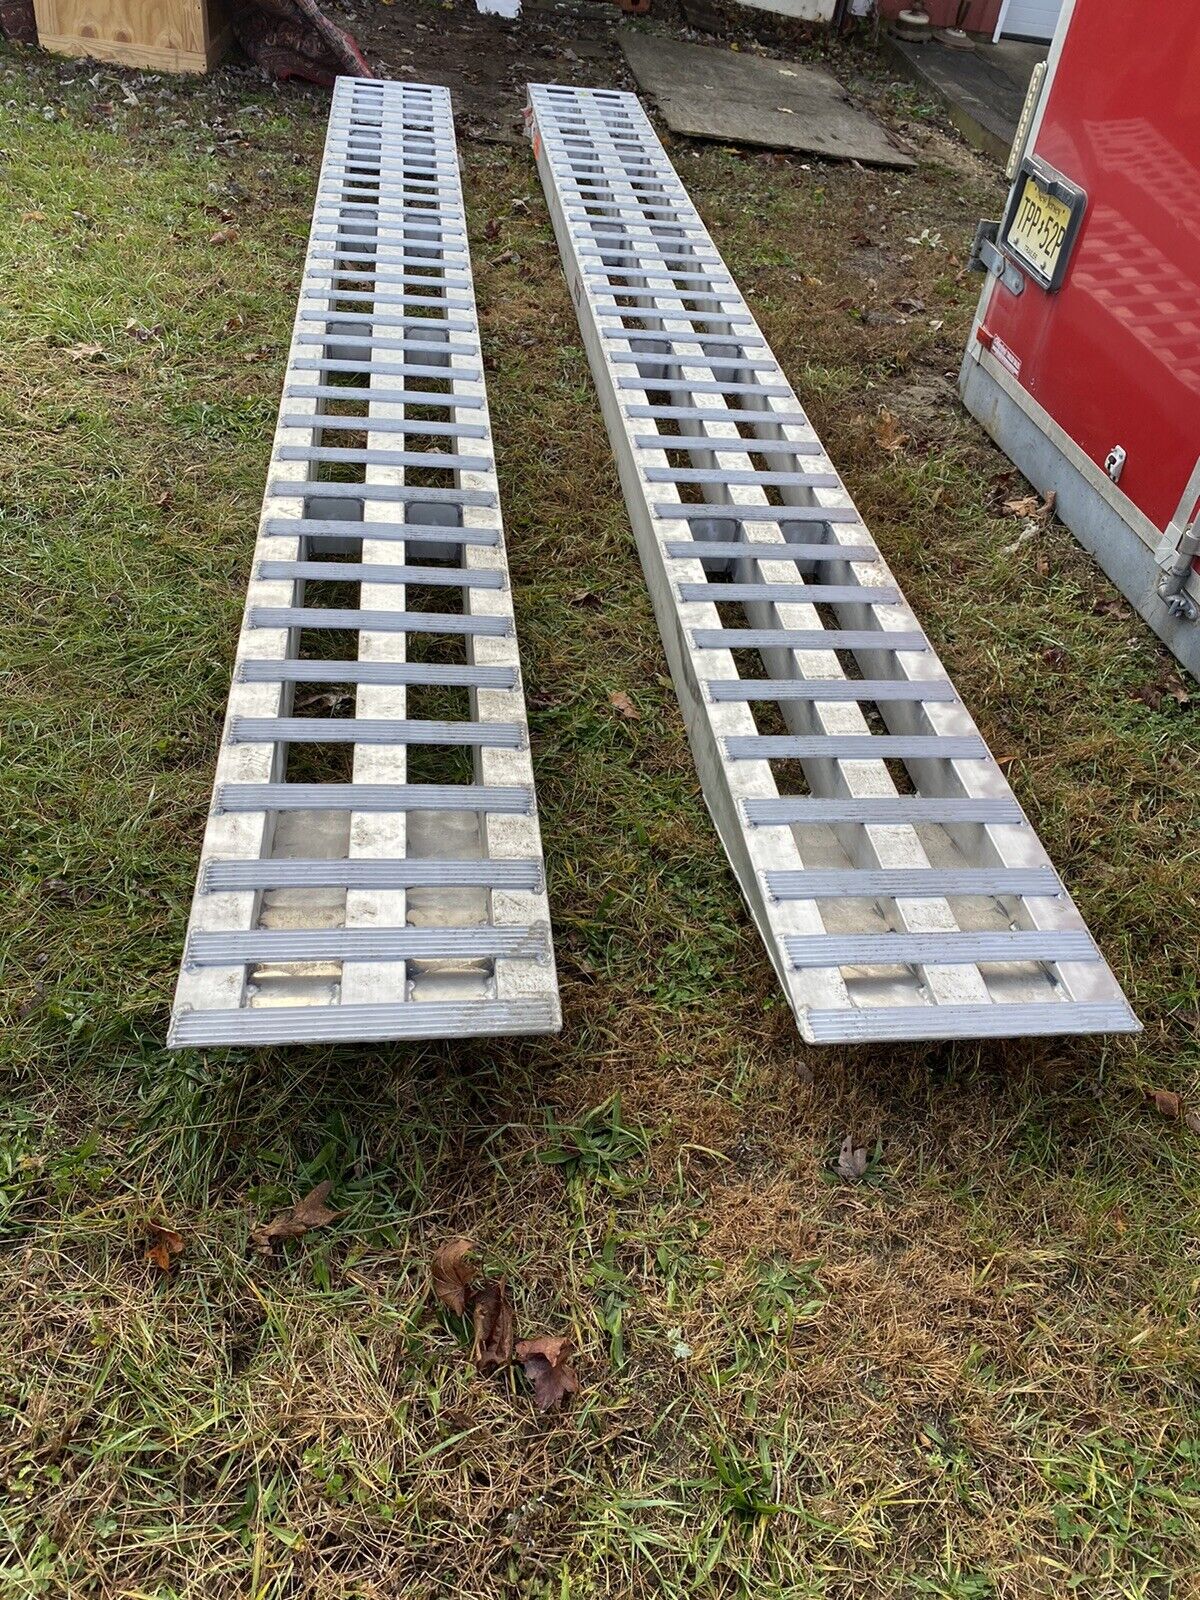 SALE   Aluminum ramps 16 x 1 1/2’ excellent condition no shipping